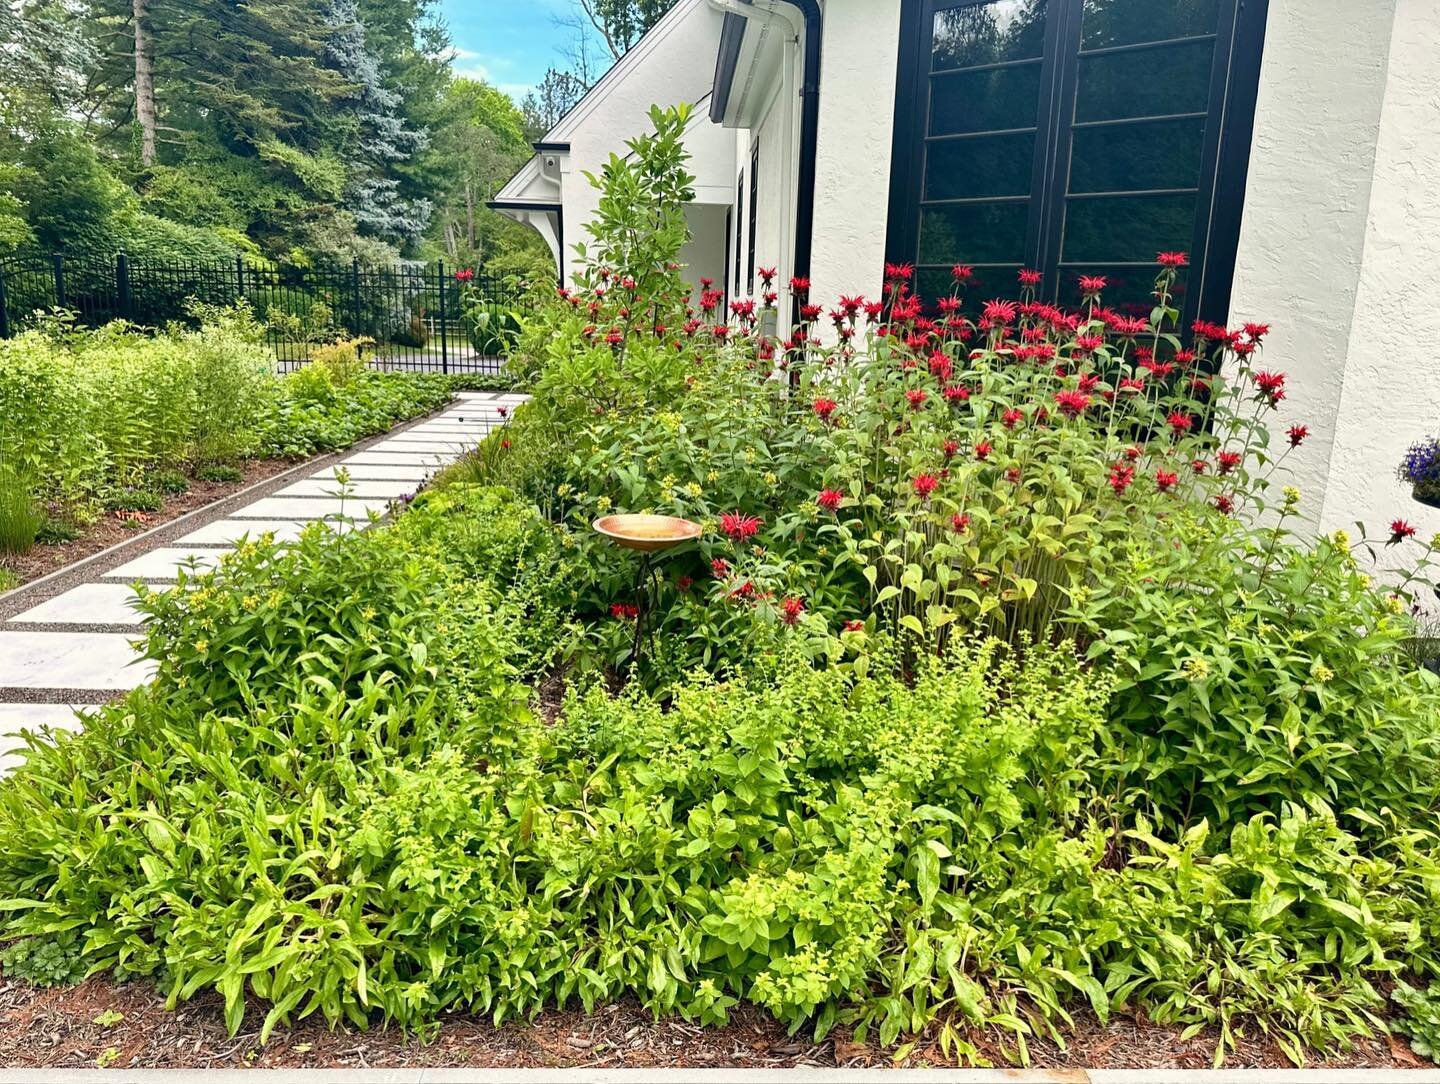 Native plant combinations in client projects with the gloriously tall red beebalm, Monarda didyma &lsquo;Jacob Cline&rsquo;. 1,2,3) A cheerful early summer combo with the bee-loving Southern bush honeysuckle (Diervilla sessilifolia &lsquo;Butterfly&r